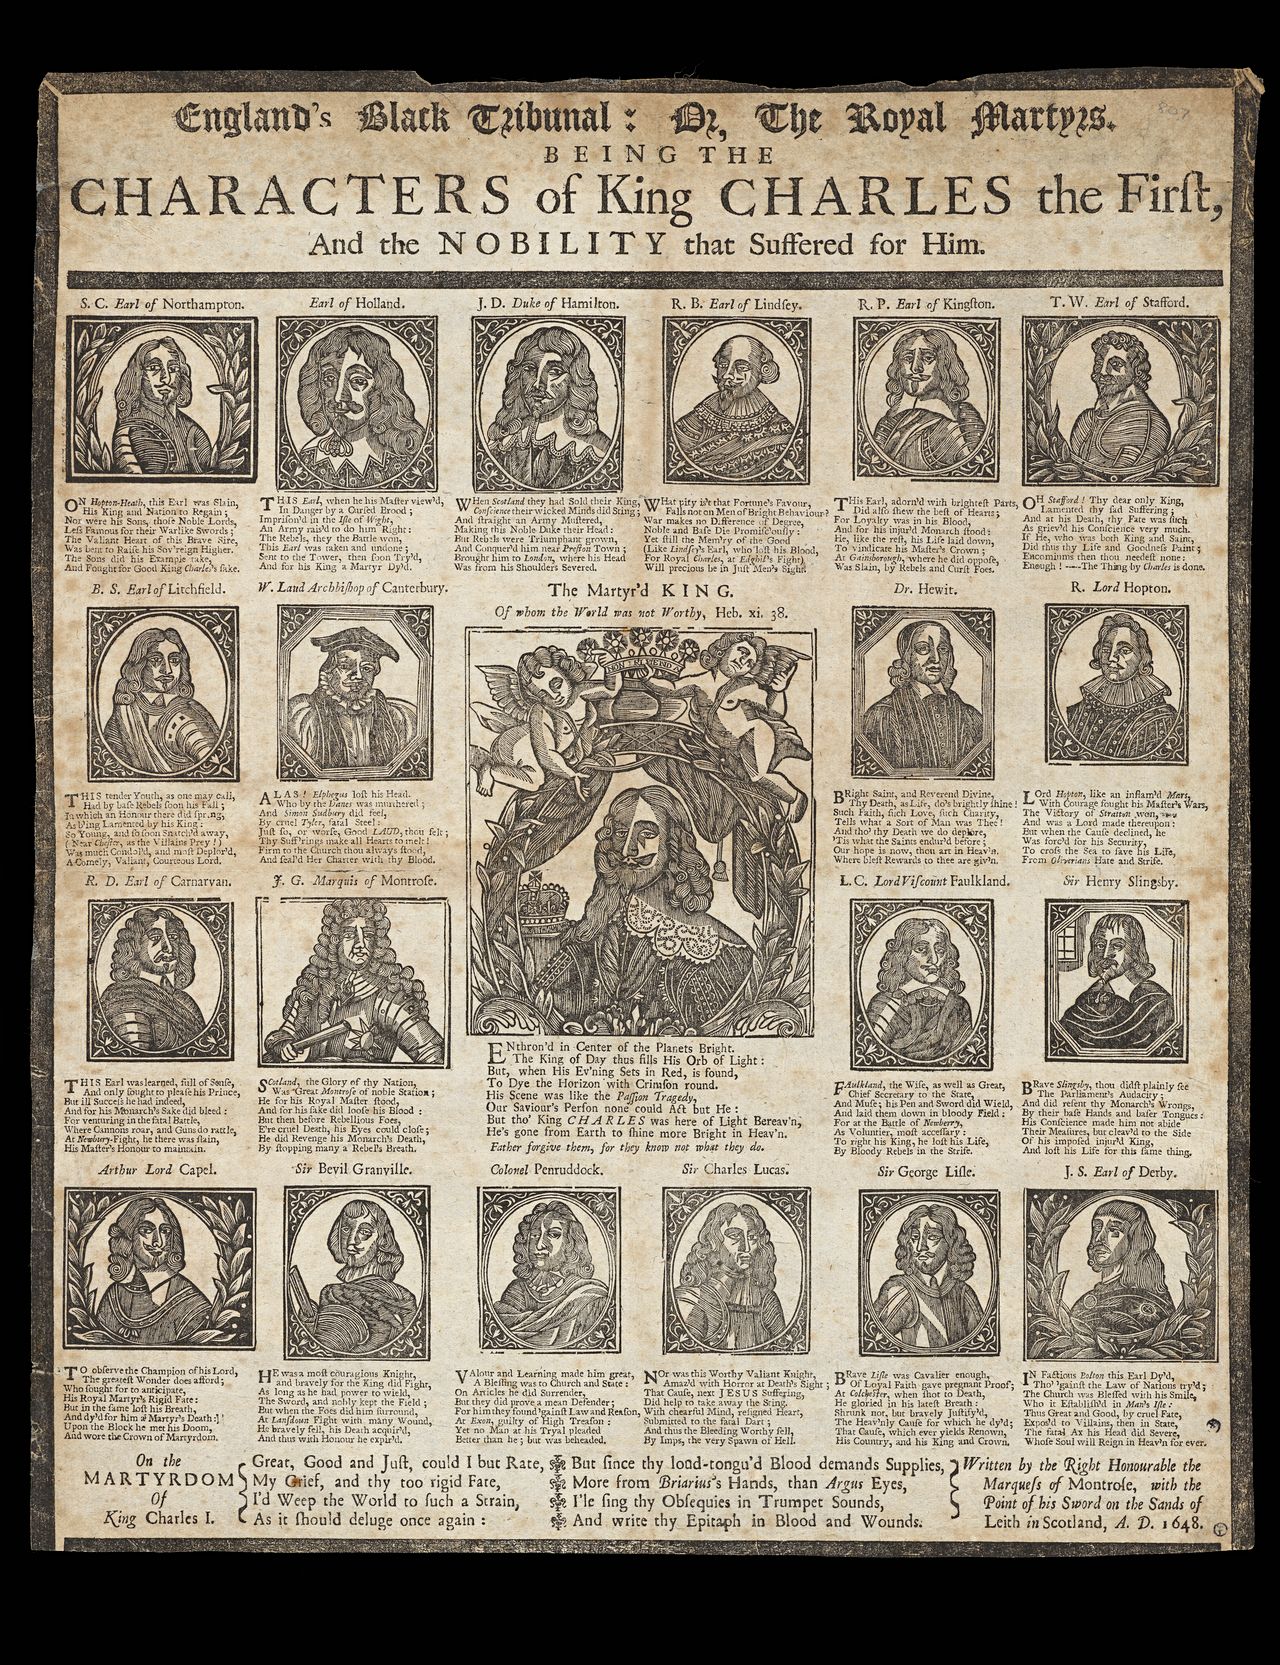 <em>England's black tribunal: or, The Royal martyrs. Being the characters of King Charles the First, and the nobility that suffered for him</em>, 1658[?], State Library Victoria, Melbourne (RAREEMM 837/1)